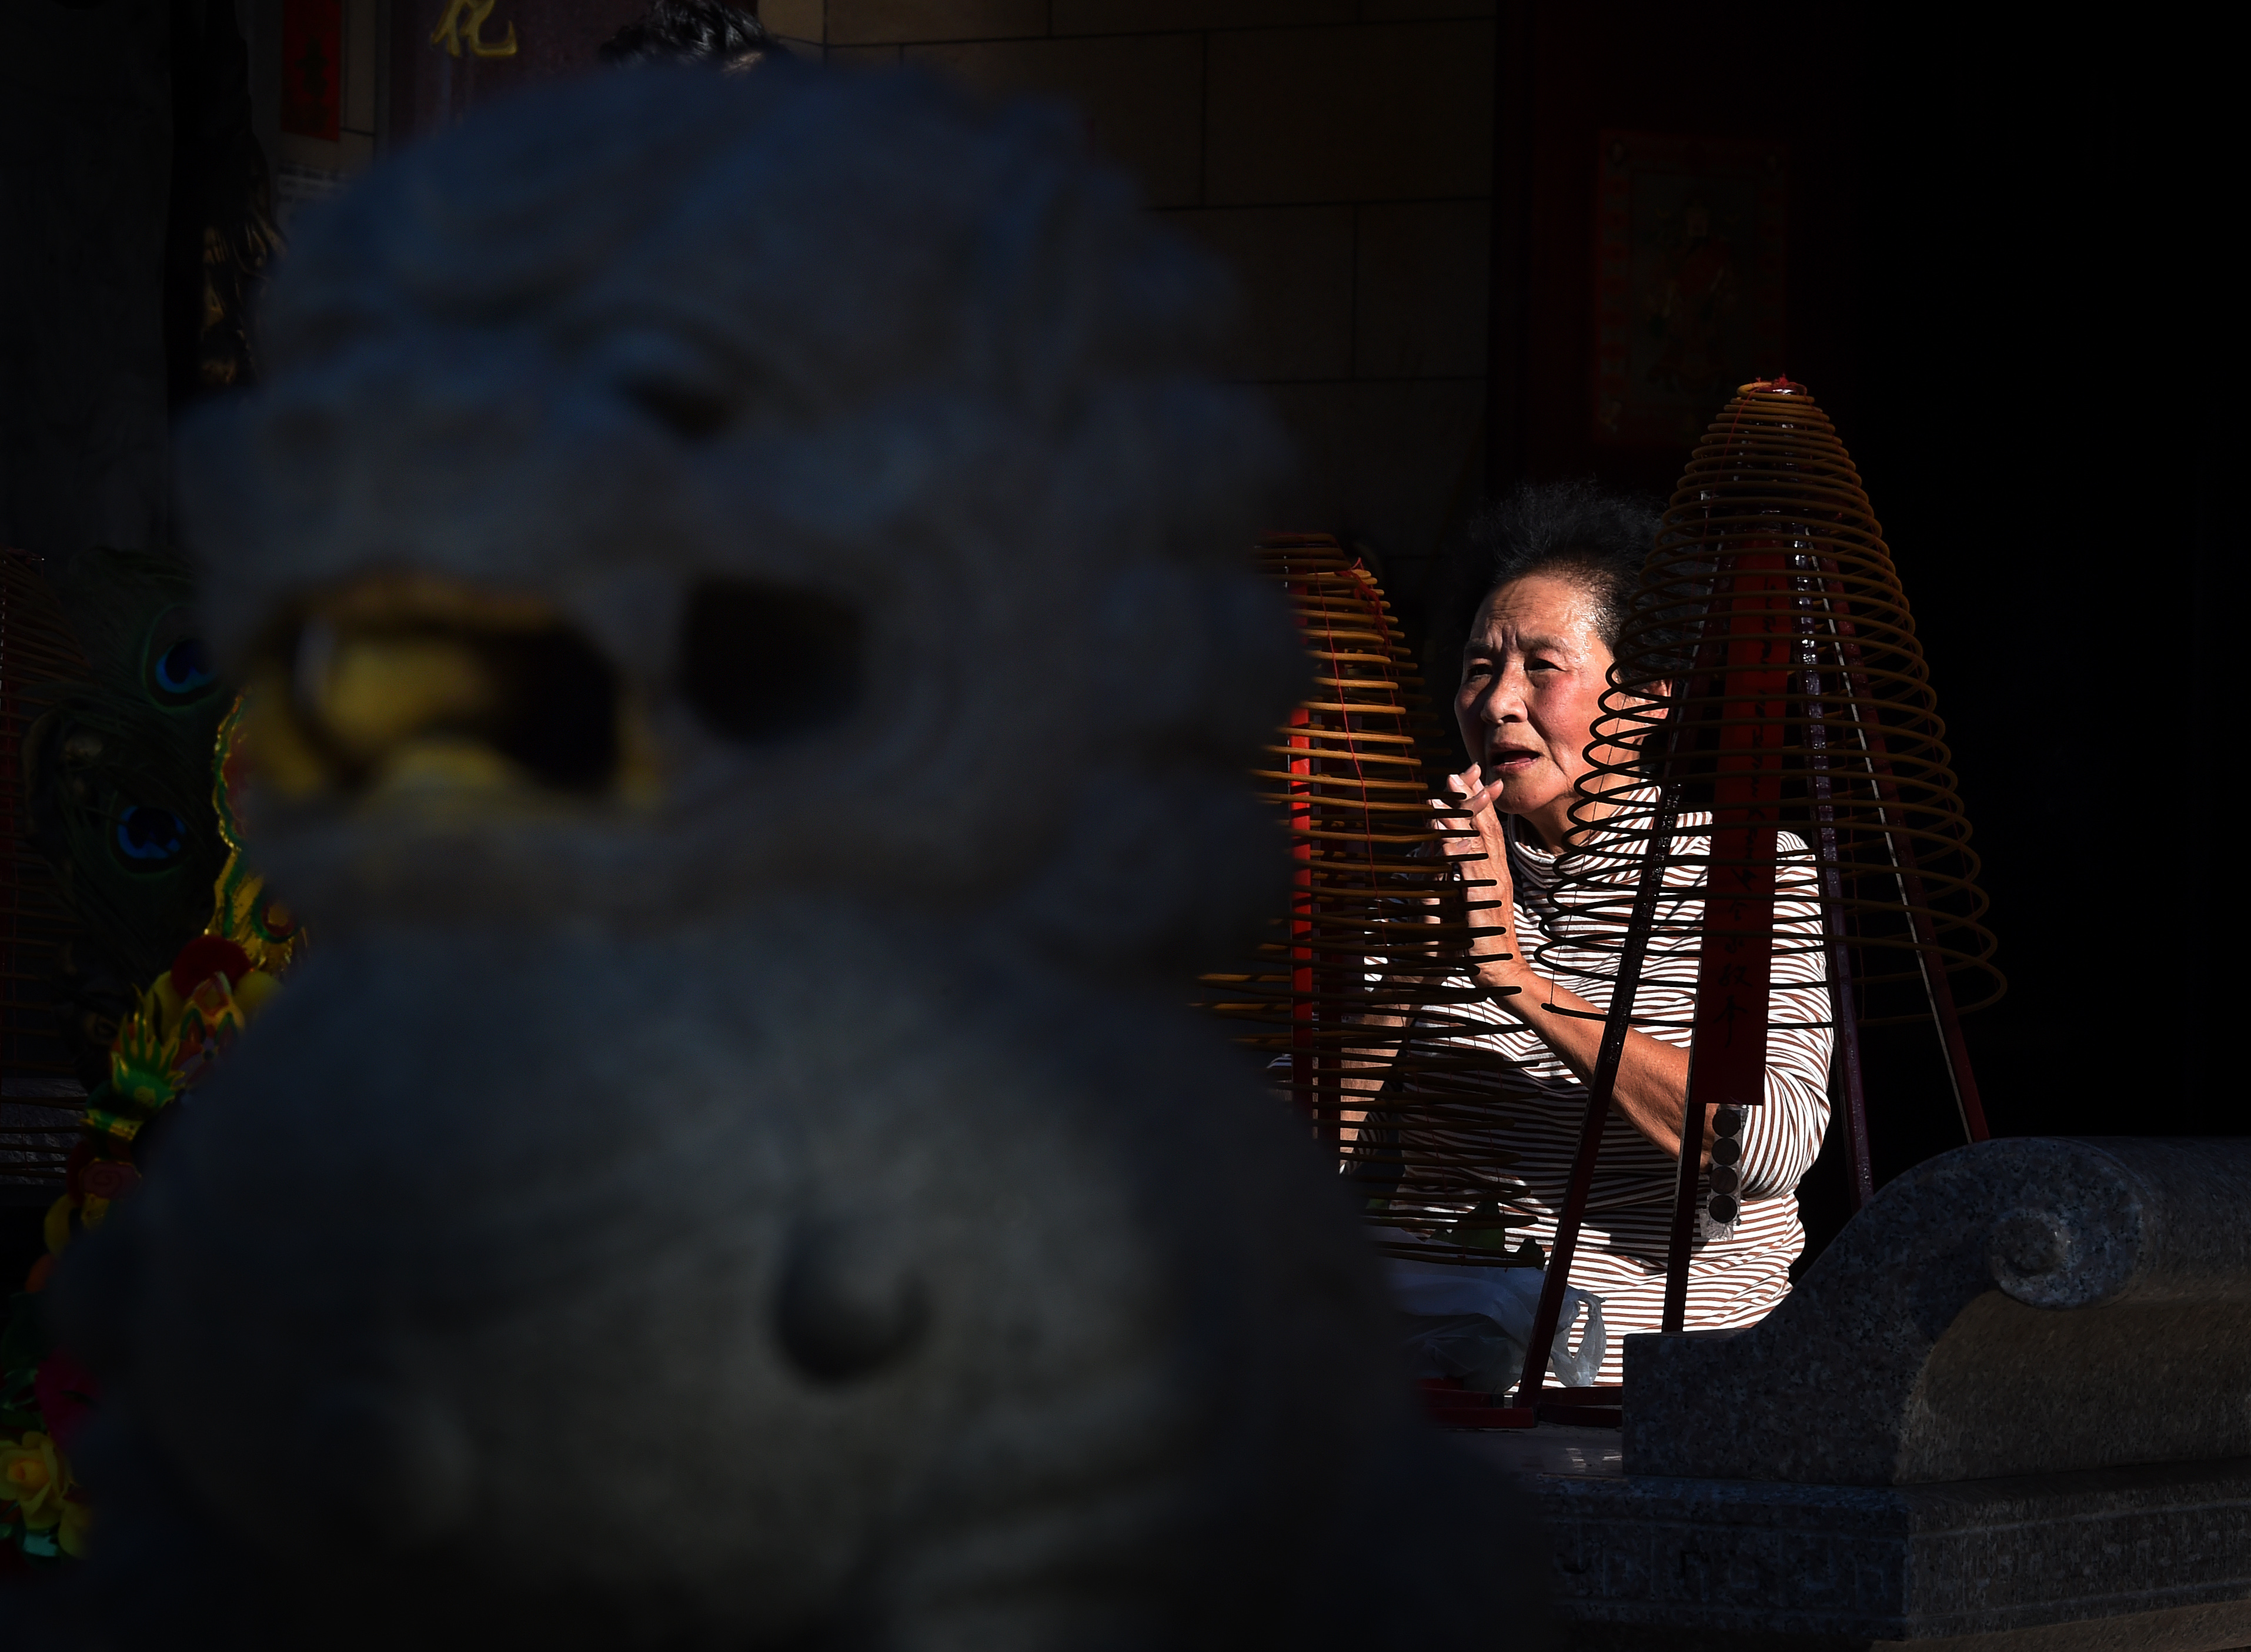 A woman prays at the Thien Hau Temple on the eve of the Lunar New Year which will be the Year of the Monkey, in Los Angeles, California on February 7, 2016. (Getty)